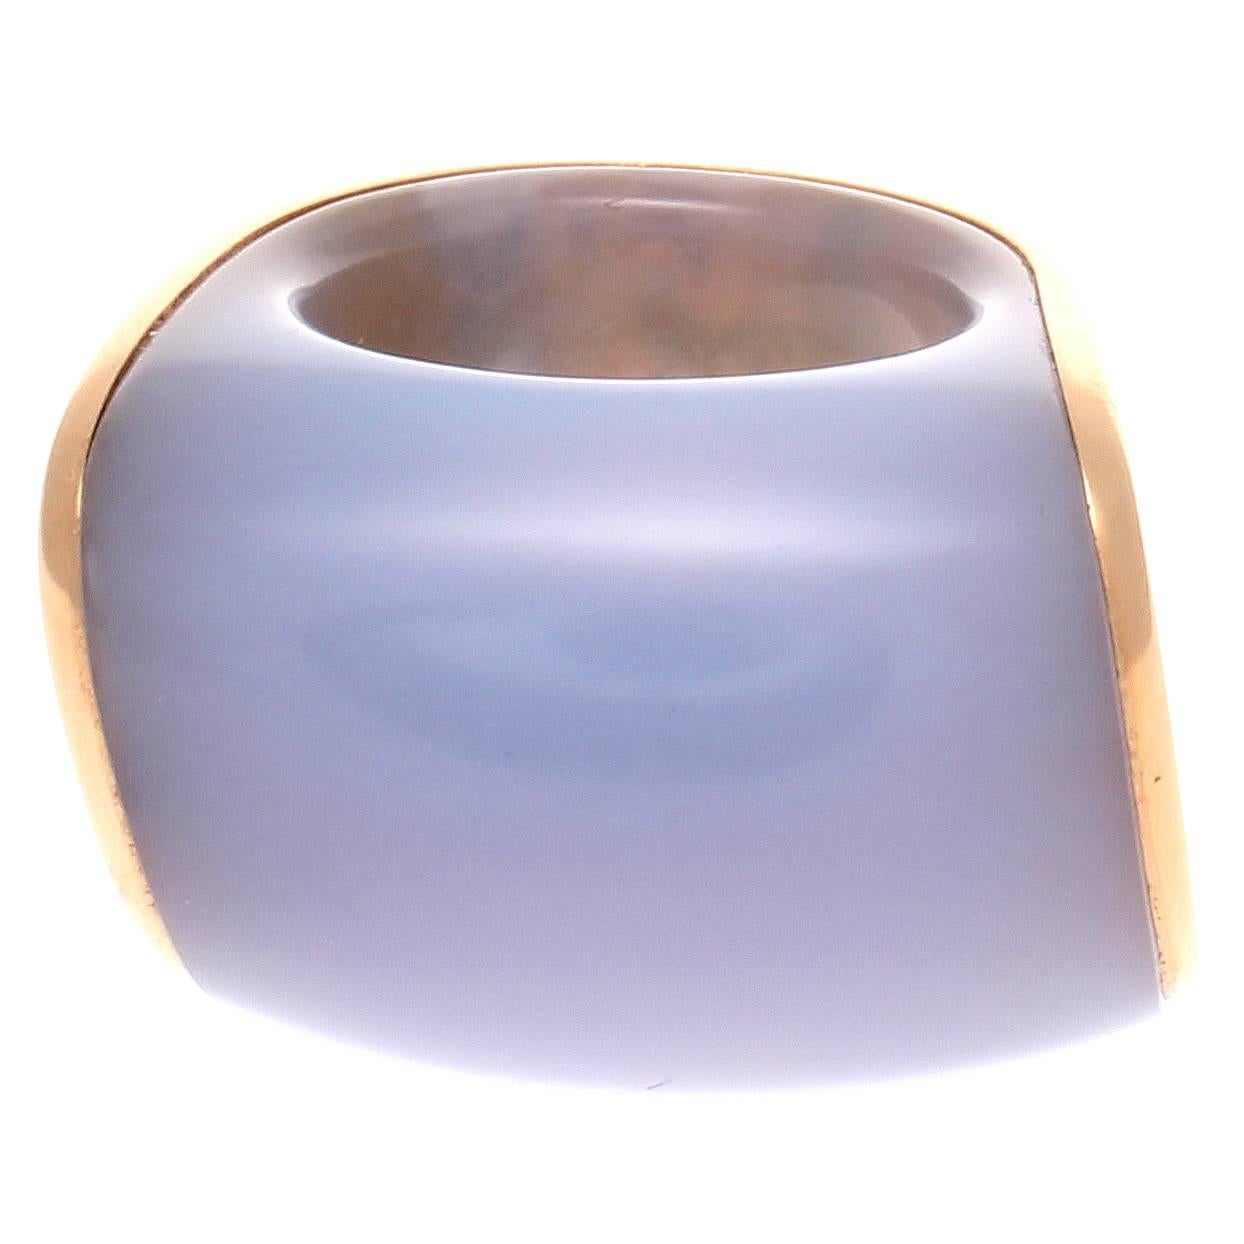 An attractive design from the Italian designers at Vhernier. Featuring  lavender chalcedony encased in 18k gold. Signed Vhernier.

Ring size 7-1/2